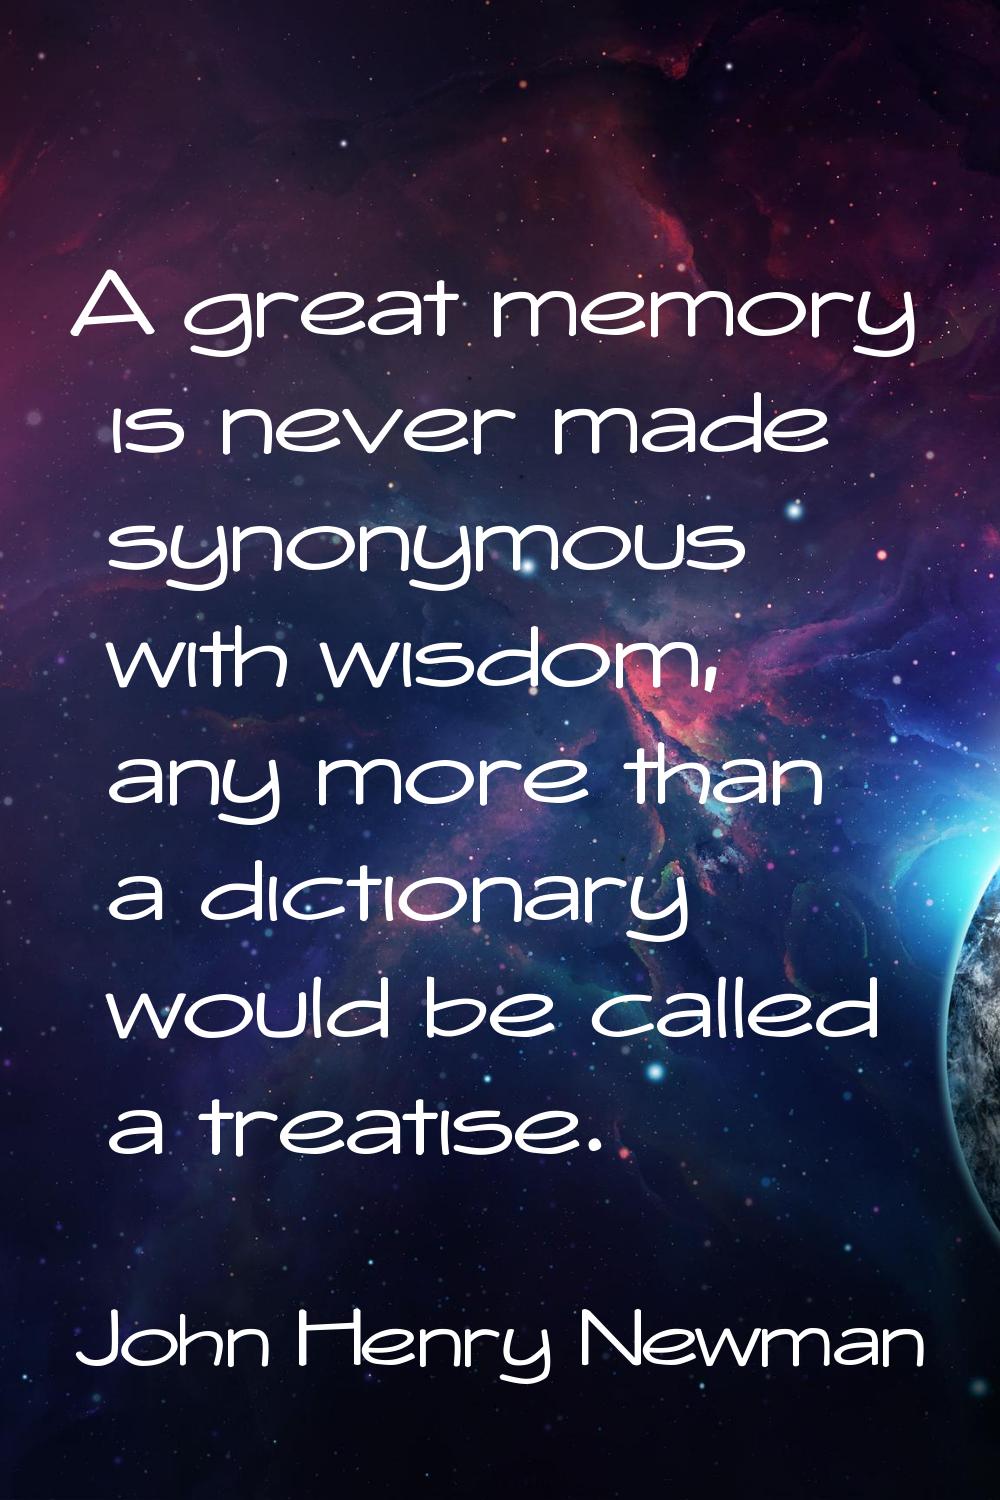 A great memory is never made synonymous with wisdom, any more than a dictionary would be called a t